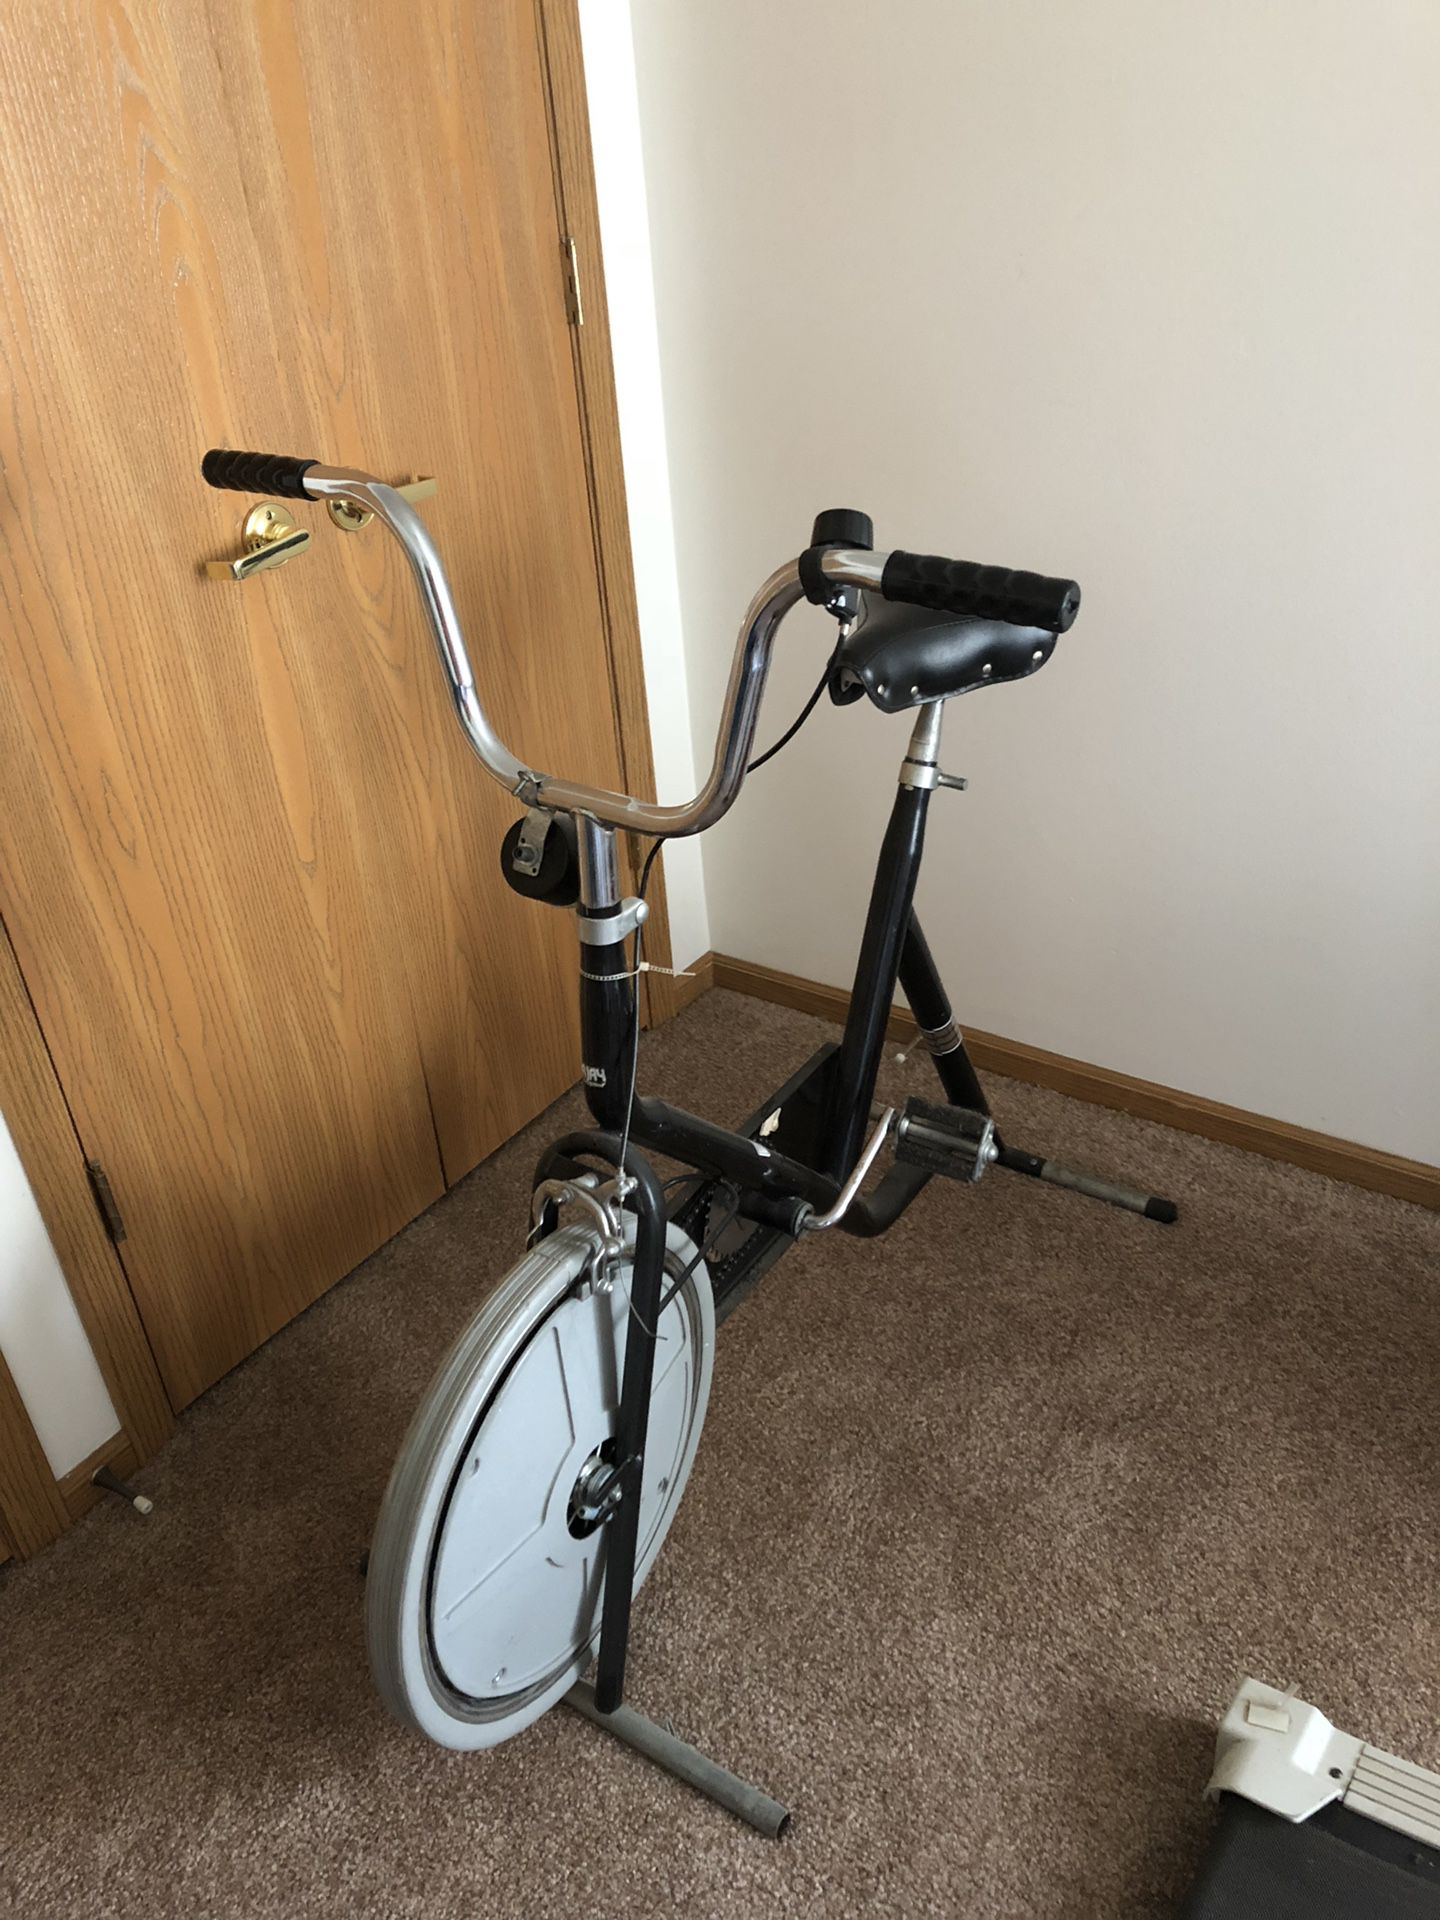 Exercise bike new seat in good condition